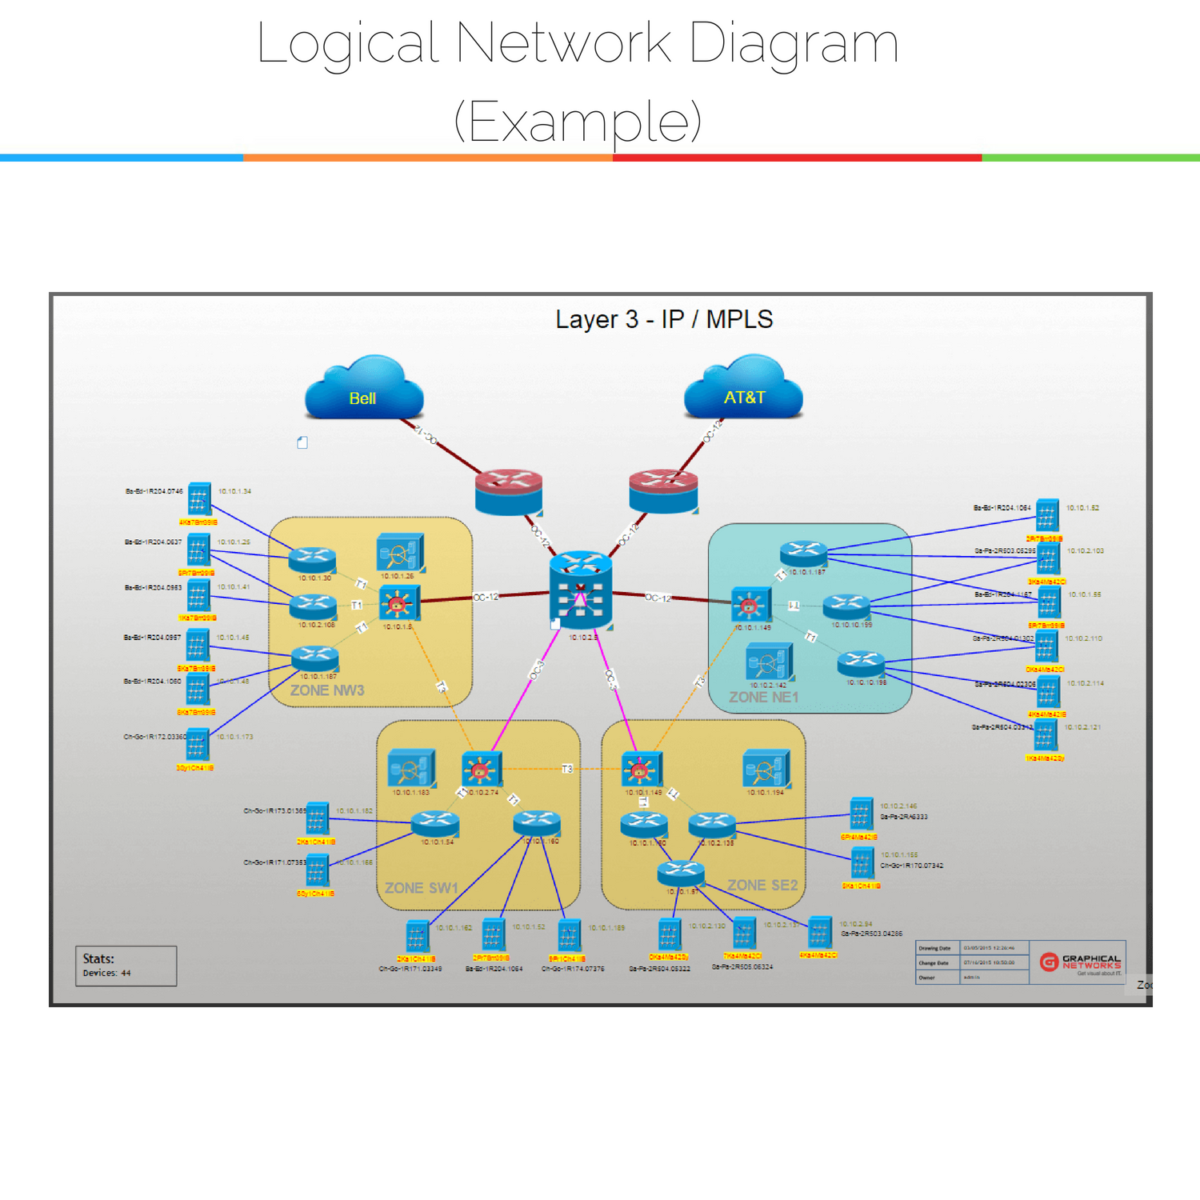 Physical Network Diagrams Explained | DCIM, Network ...